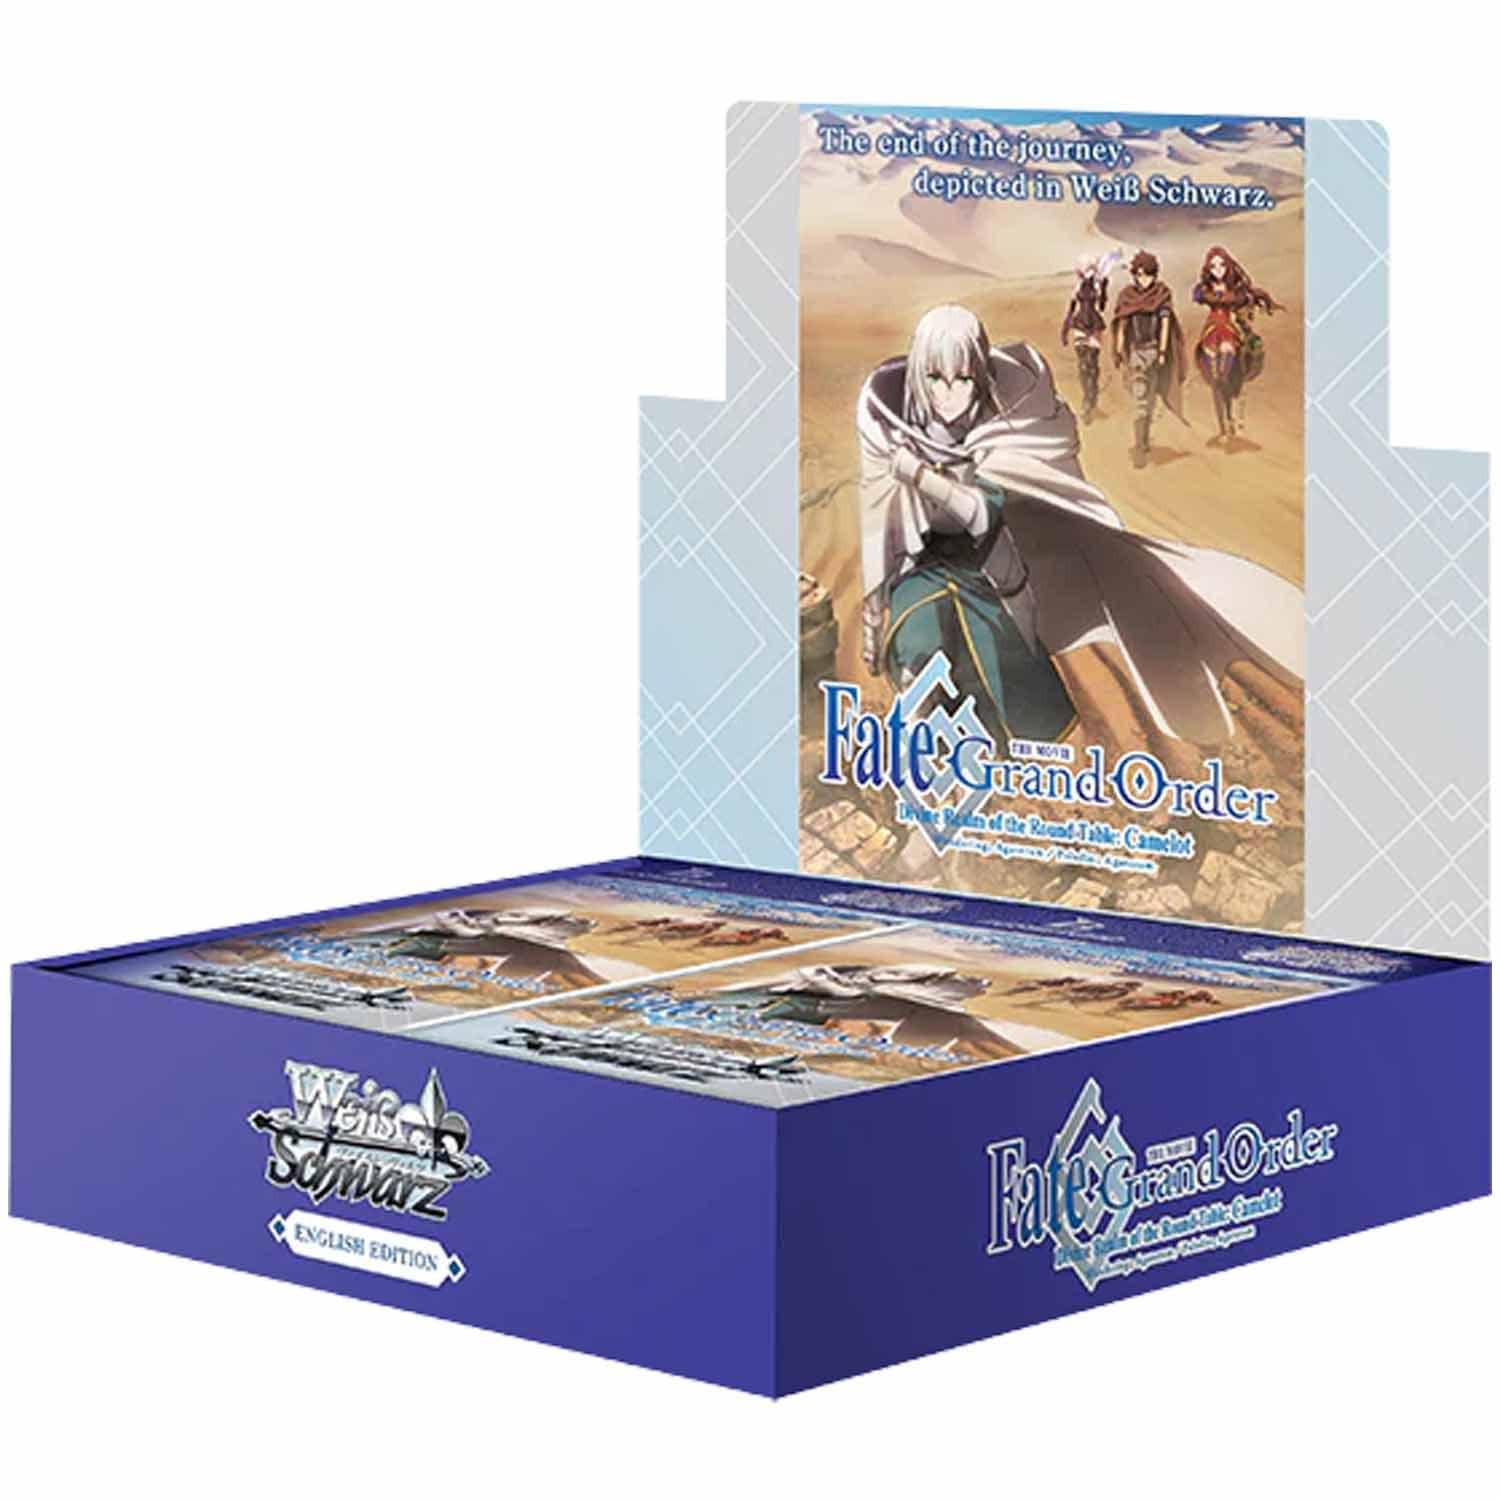 Bushiroad  Fate Grand/Order The Movie Booster Display - 1st Edition - Weiss Schwarz TCG - EN 